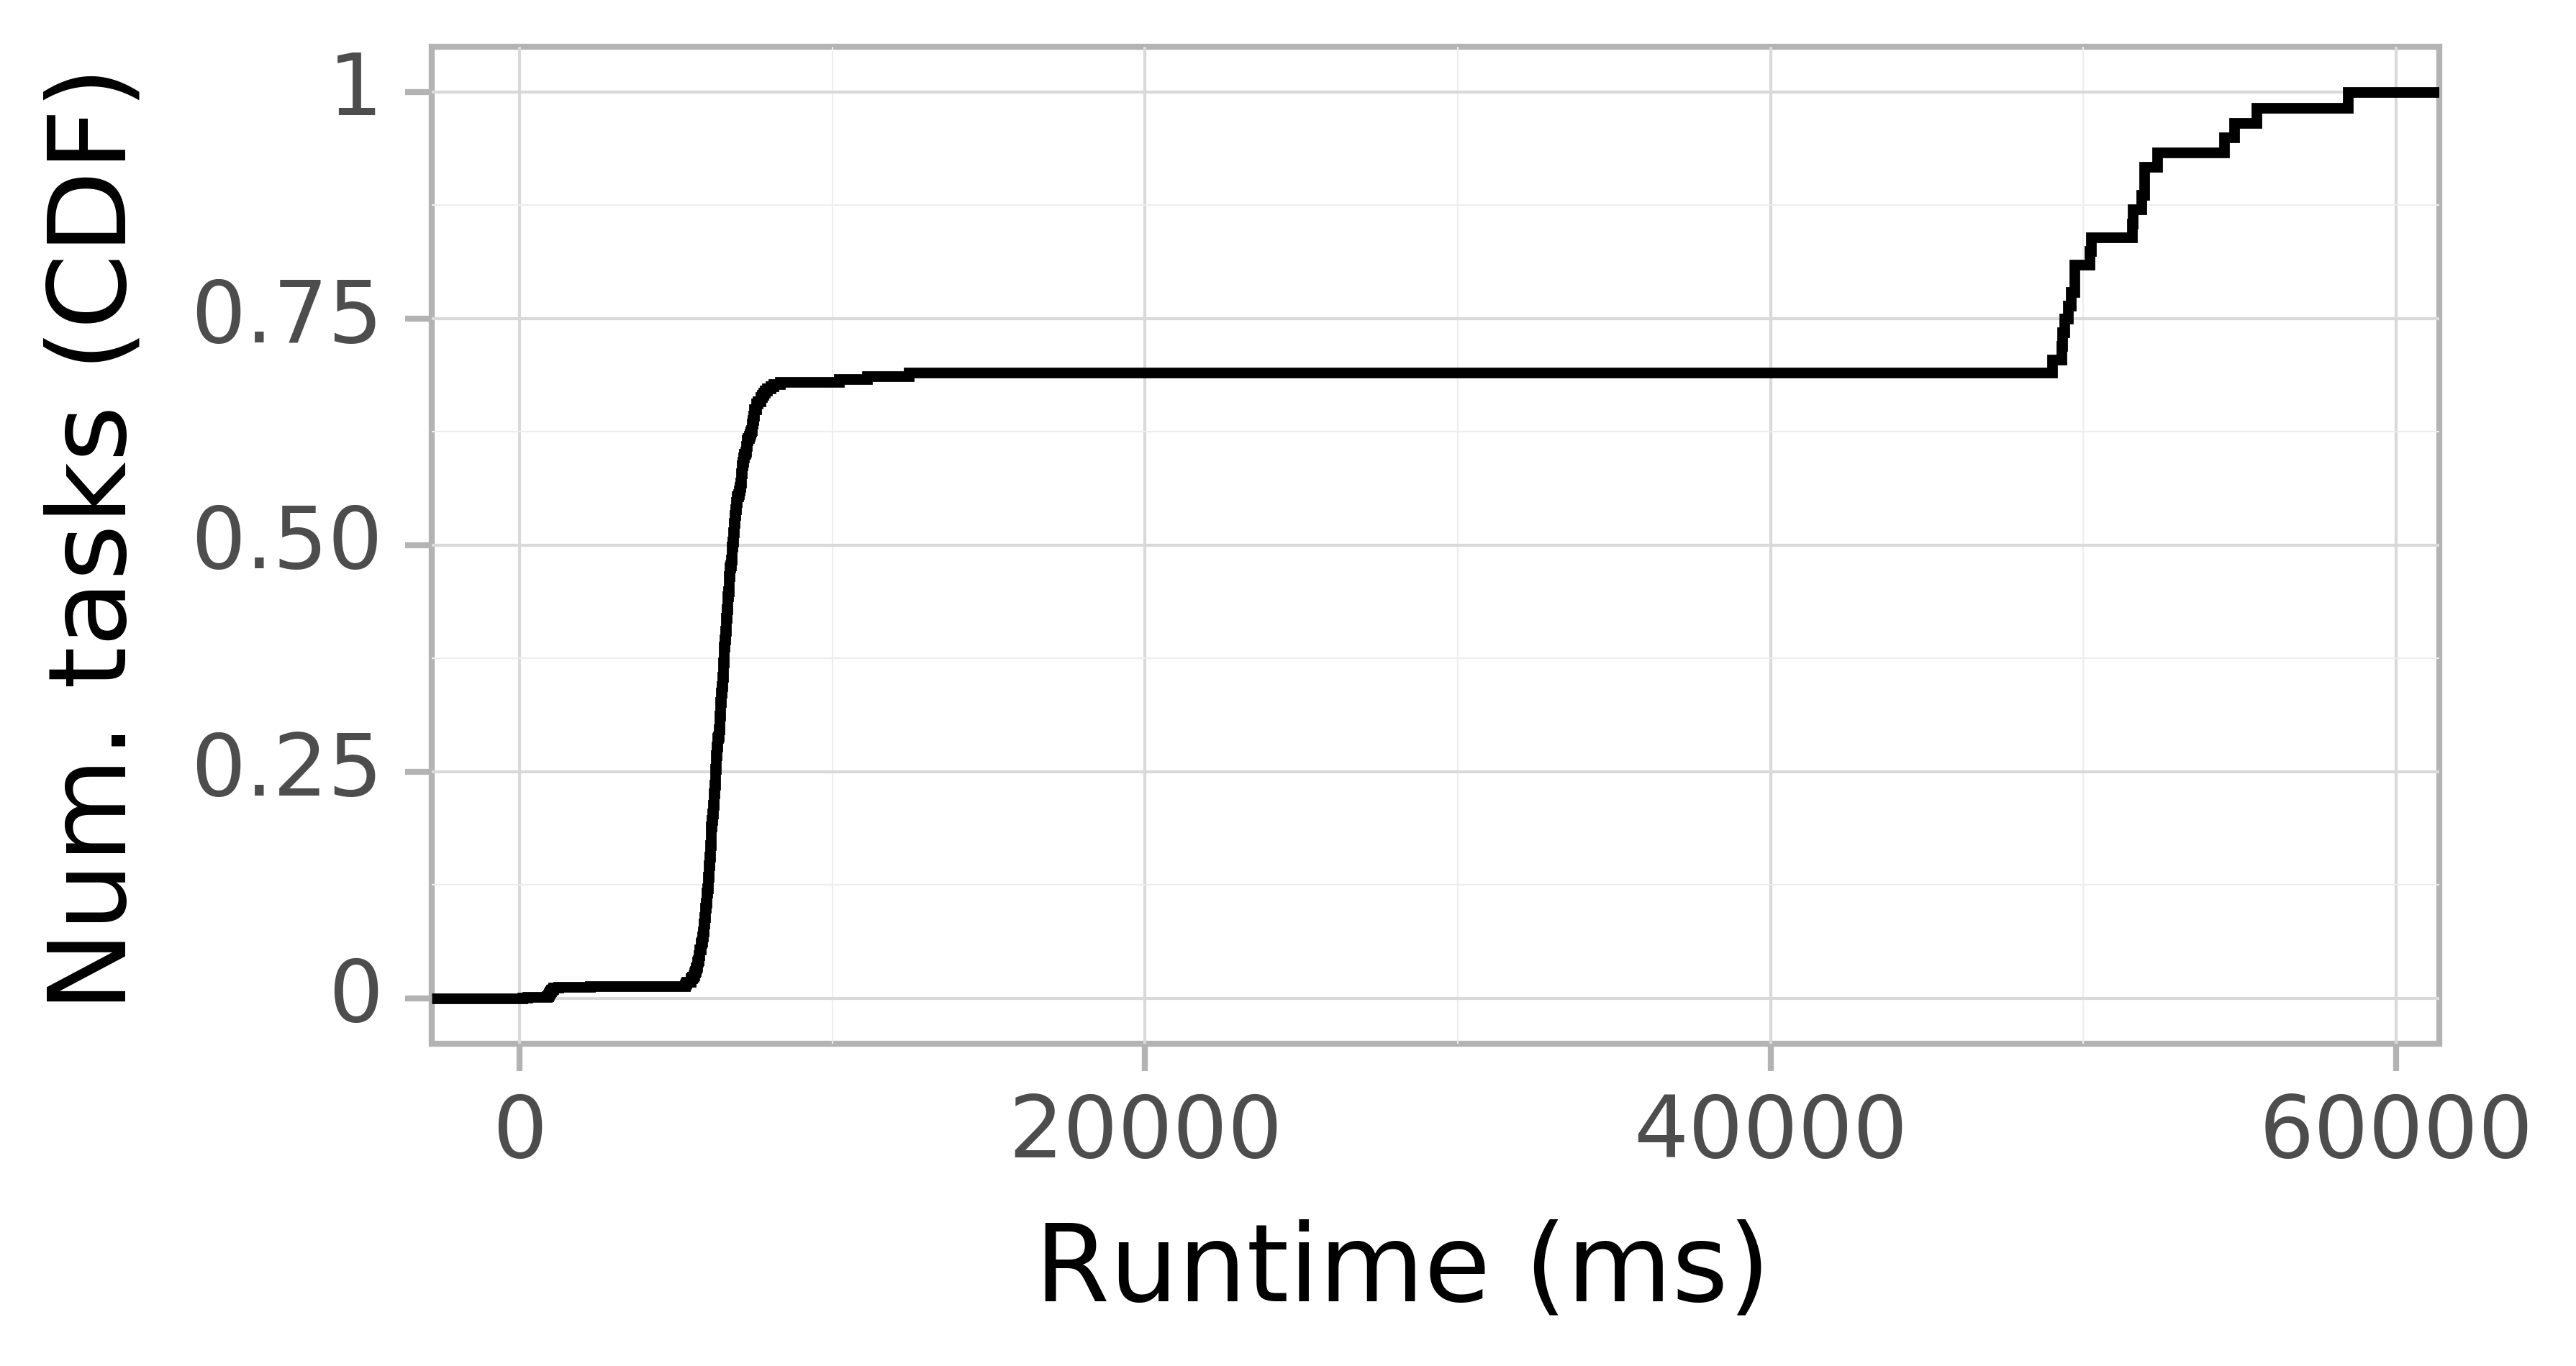 Task runtime CDF graph for the askalon-new_ee59 trace.